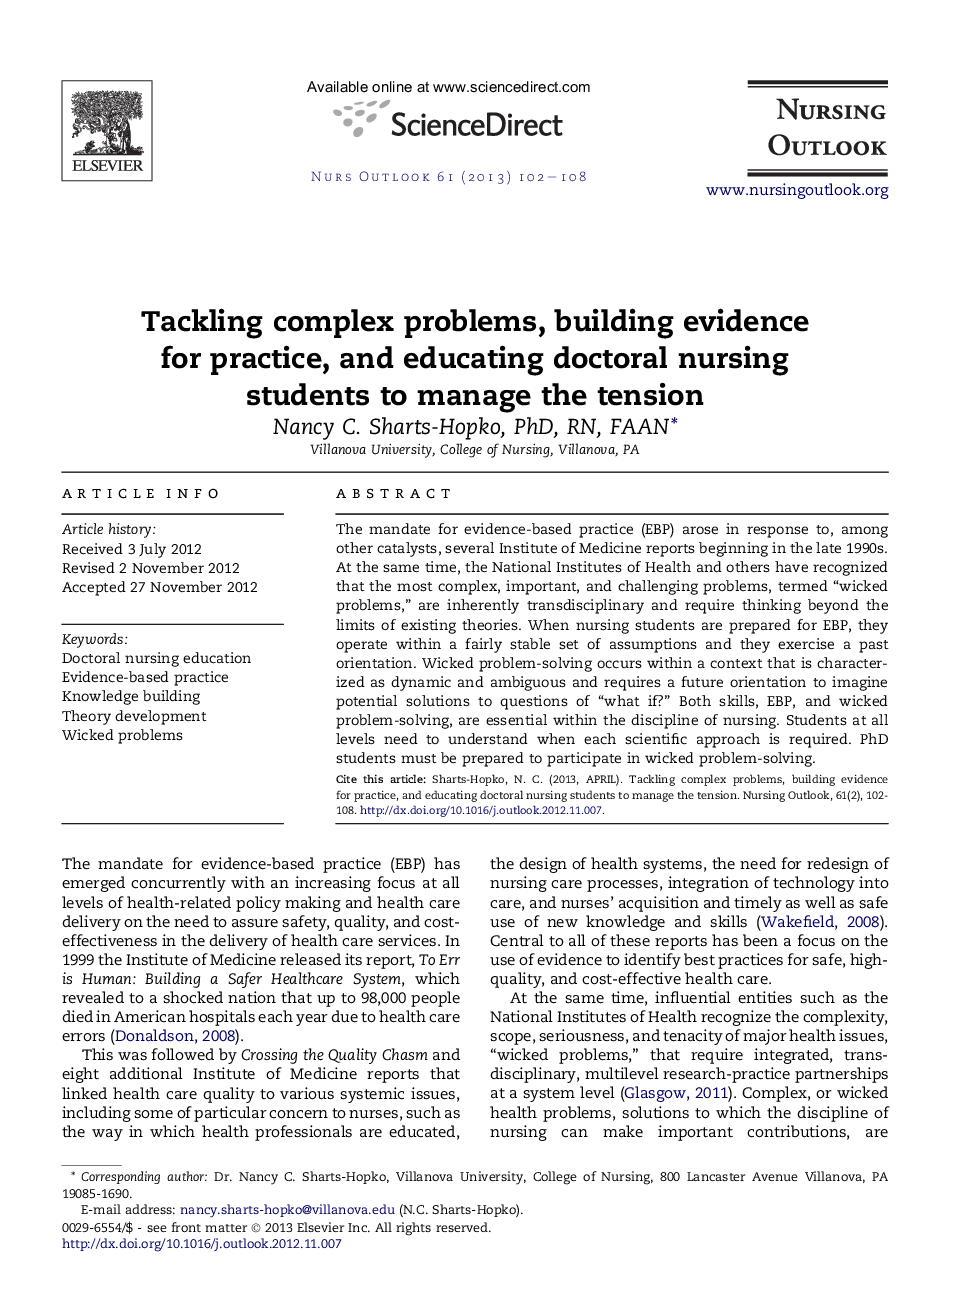 Tackling complex problems, building evidence for practice, and educating doctoral nursing students to manage the tension